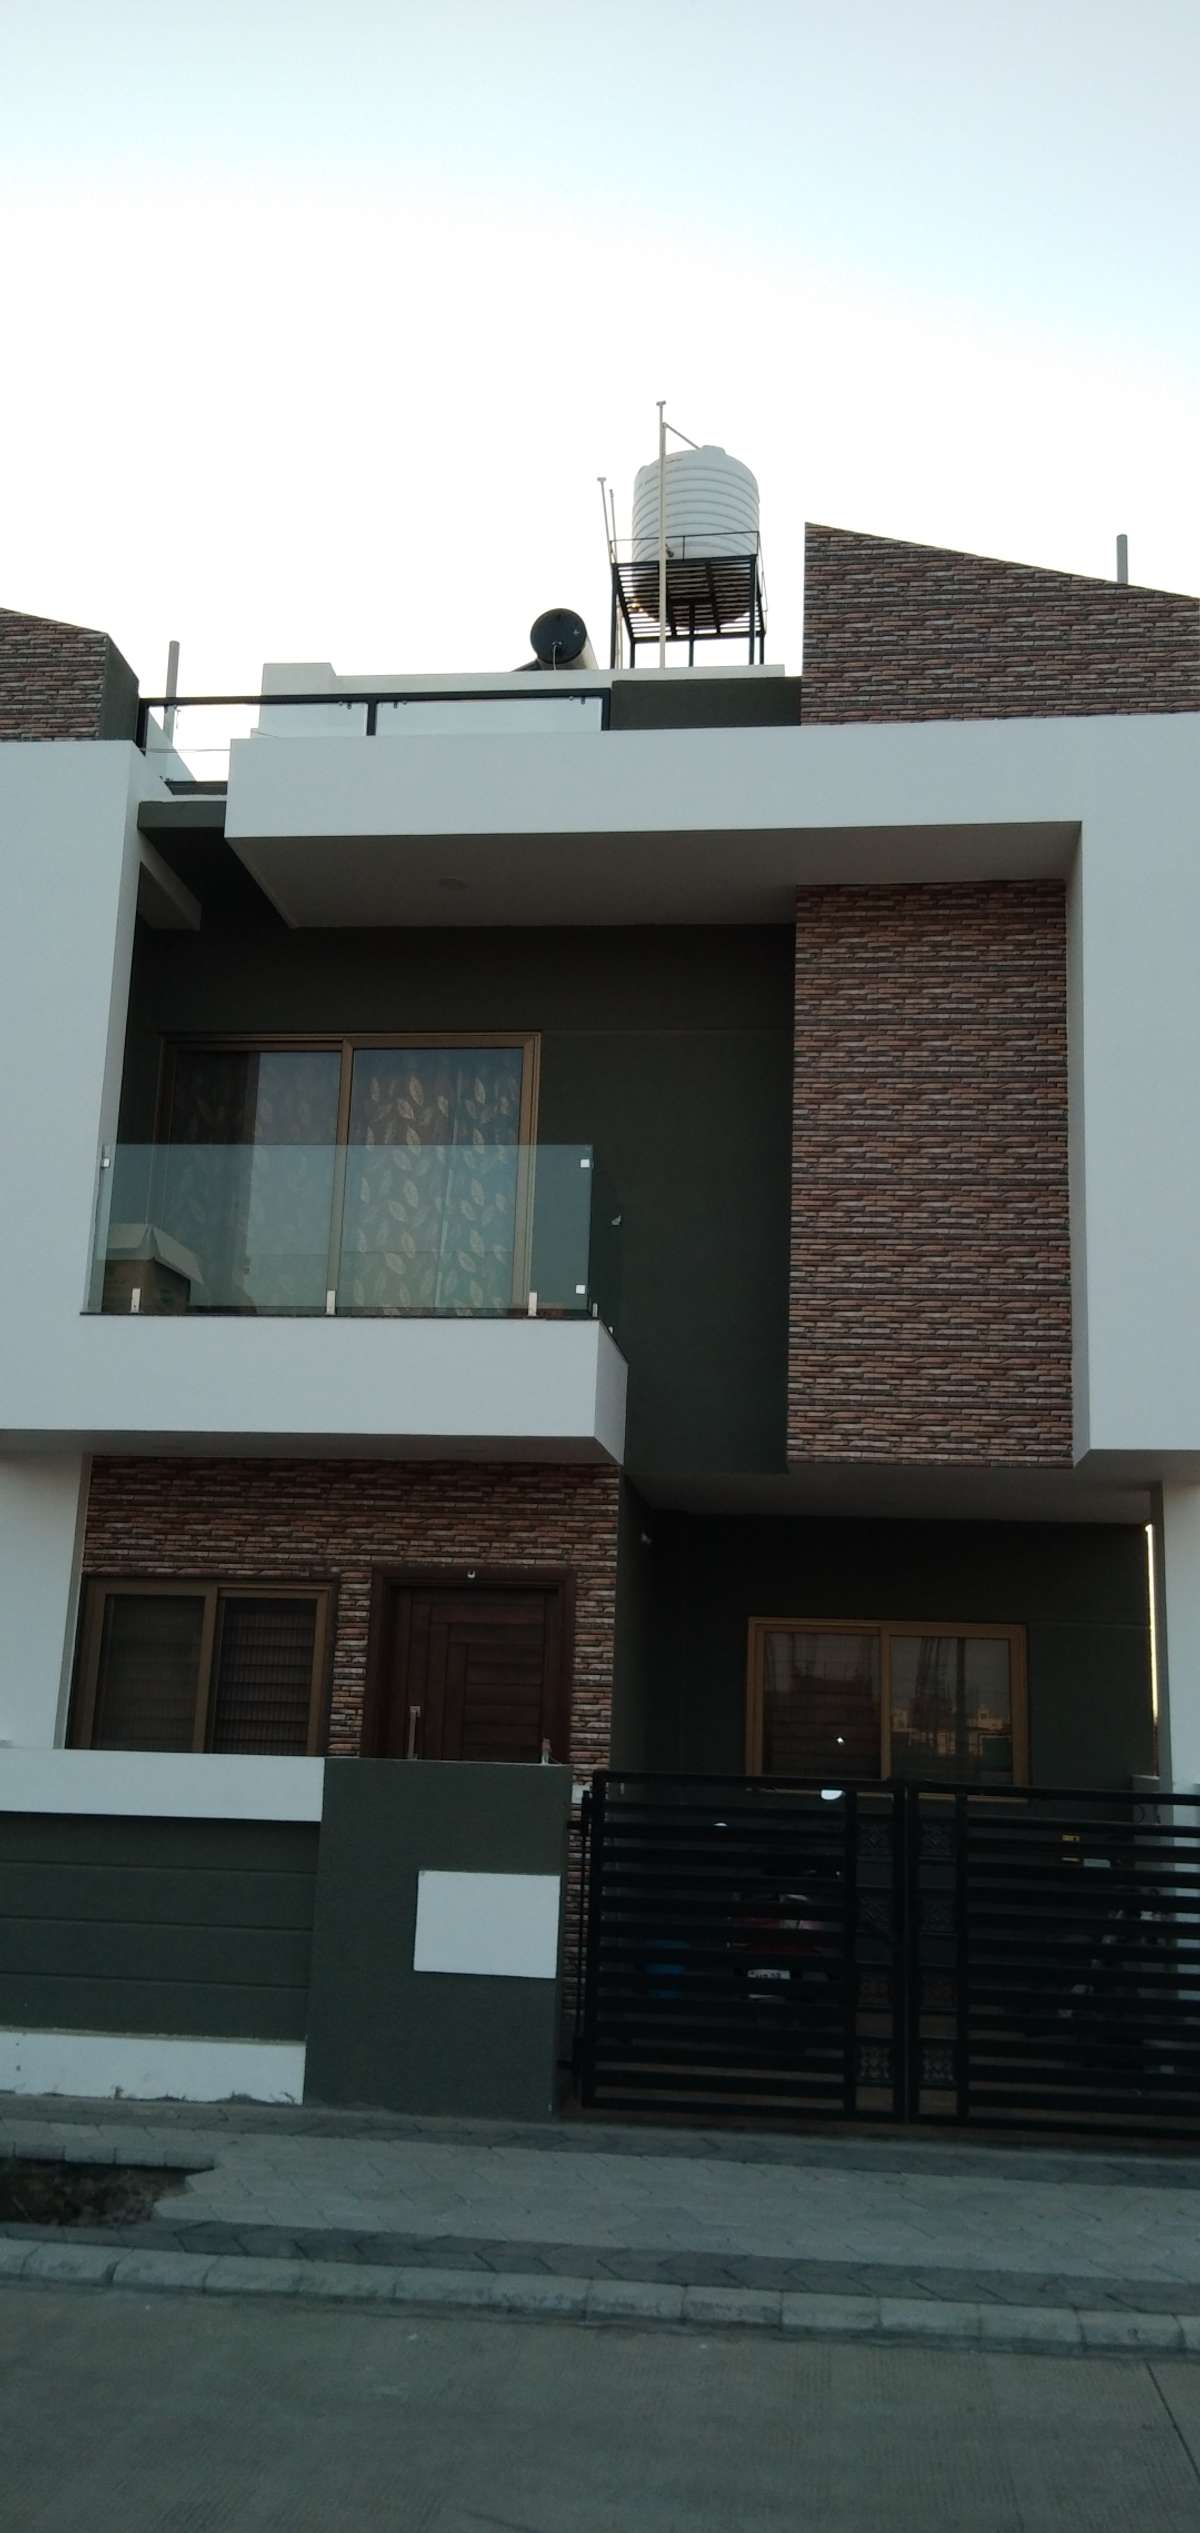 Designs by Contractor Imran khan, Indore | Kolo